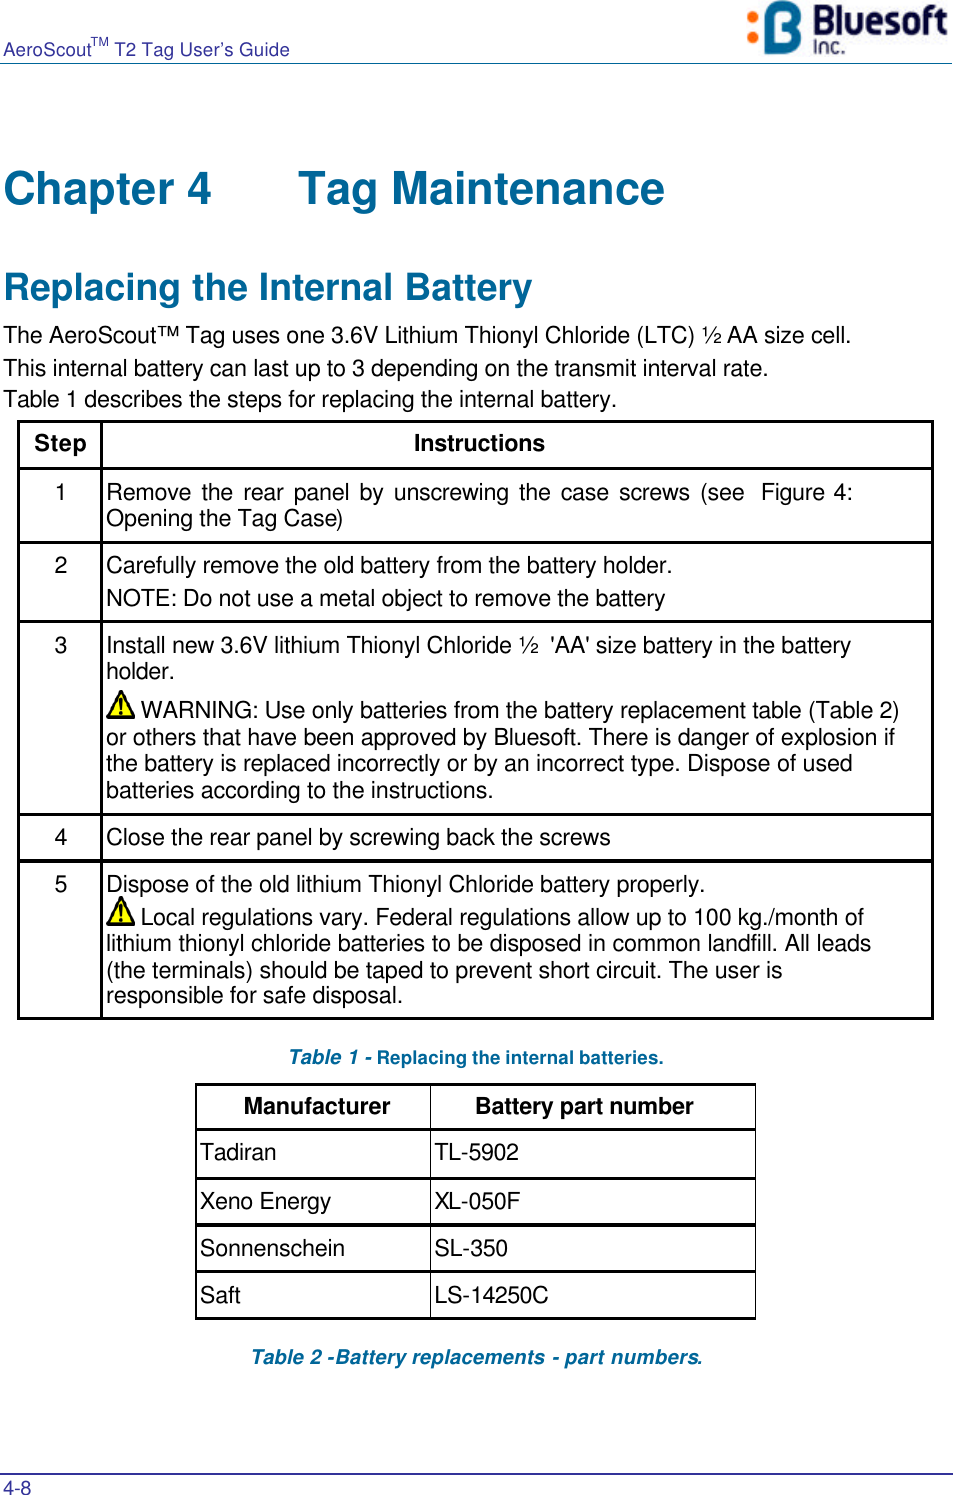 AeroScoutTM T2 Tag User’s Guide    4-8   Chapter 4 Tag Maintenance Replacing the Internal Battery The AeroScout™ Tag uses one 3.6V Lithium Thionyl Chloride (LTC) ½ AA size cell. This internal battery can last up to 3 depending on the transmit interval rate. Table 1 describes the steps for replacing the internal battery.  Step Instructions 1 Remove the rear panel by unscrewing the case screws (see  Figure 4: Opening the Tag Case) 2 Carefully remove the old battery from the battery holder.                                                NOTE: Do not use a metal object to remove the battery 3 Install new 3.6V lithium Thionyl Chloride ½  &apos;AA&apos; size battery in the battery holder.               WARNING: Use only batteries from the battery replacement table (Table 2) or others that have been approved by Bluesoft. There is danger of explosion if the battery is replaced incorrectly or by an incorrect type. Dispose of used batteries according to the instructions. 4 Close the rear panel by screwing back the screws 5 Dispose of the old lithium Thionyl Chloride battery properly.                                                                Local regulations vary. Federal regulations allow up to 100 kg./month of lithium thionyl chloride batteries to be disposed in common landfill. All leads (the terminals) should be taped to prevent short circuit. The user is responsible for safe disposal.  Table 1 - Replacing the internal batteries. Manufacturer Battery part number Tadiran TL-5902 Xeno Energy XL-050F Sonnenschein SL-350 Saft LS-14250C Table 2 -Battery replacements - part numbers. 